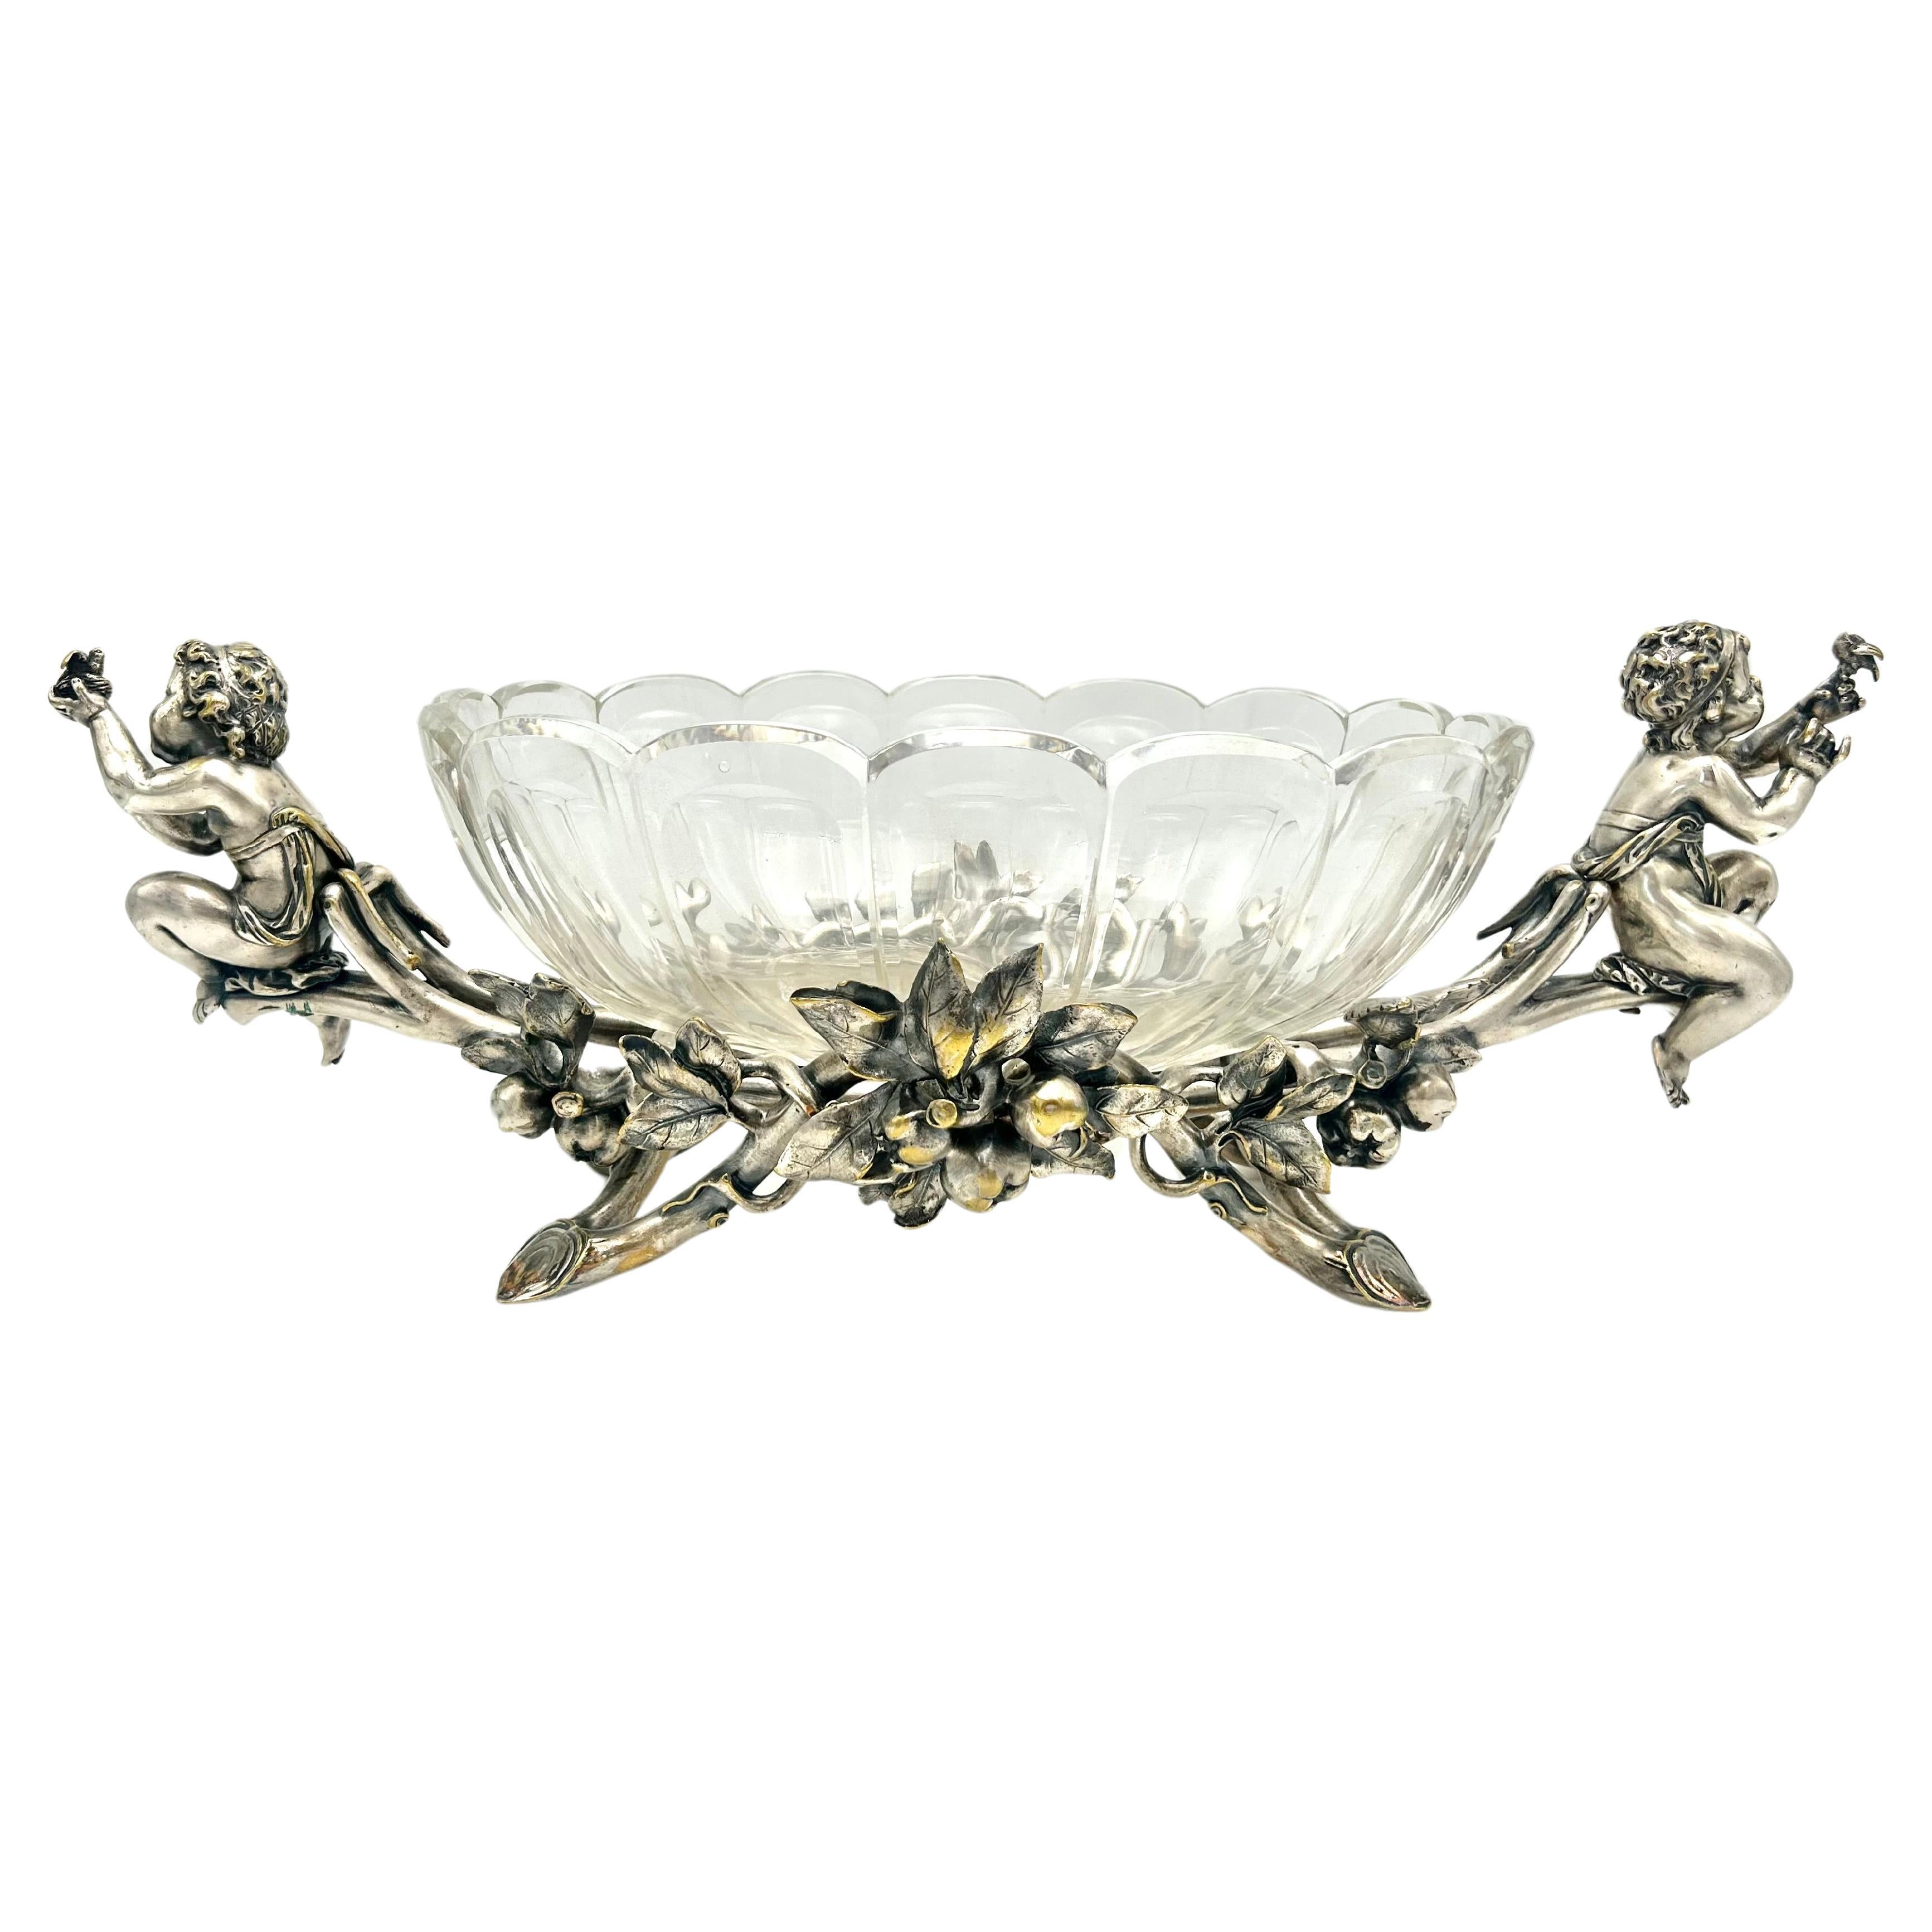 Antique silver-plated jardiniere, Christofle, France, early 20th century. For Sale